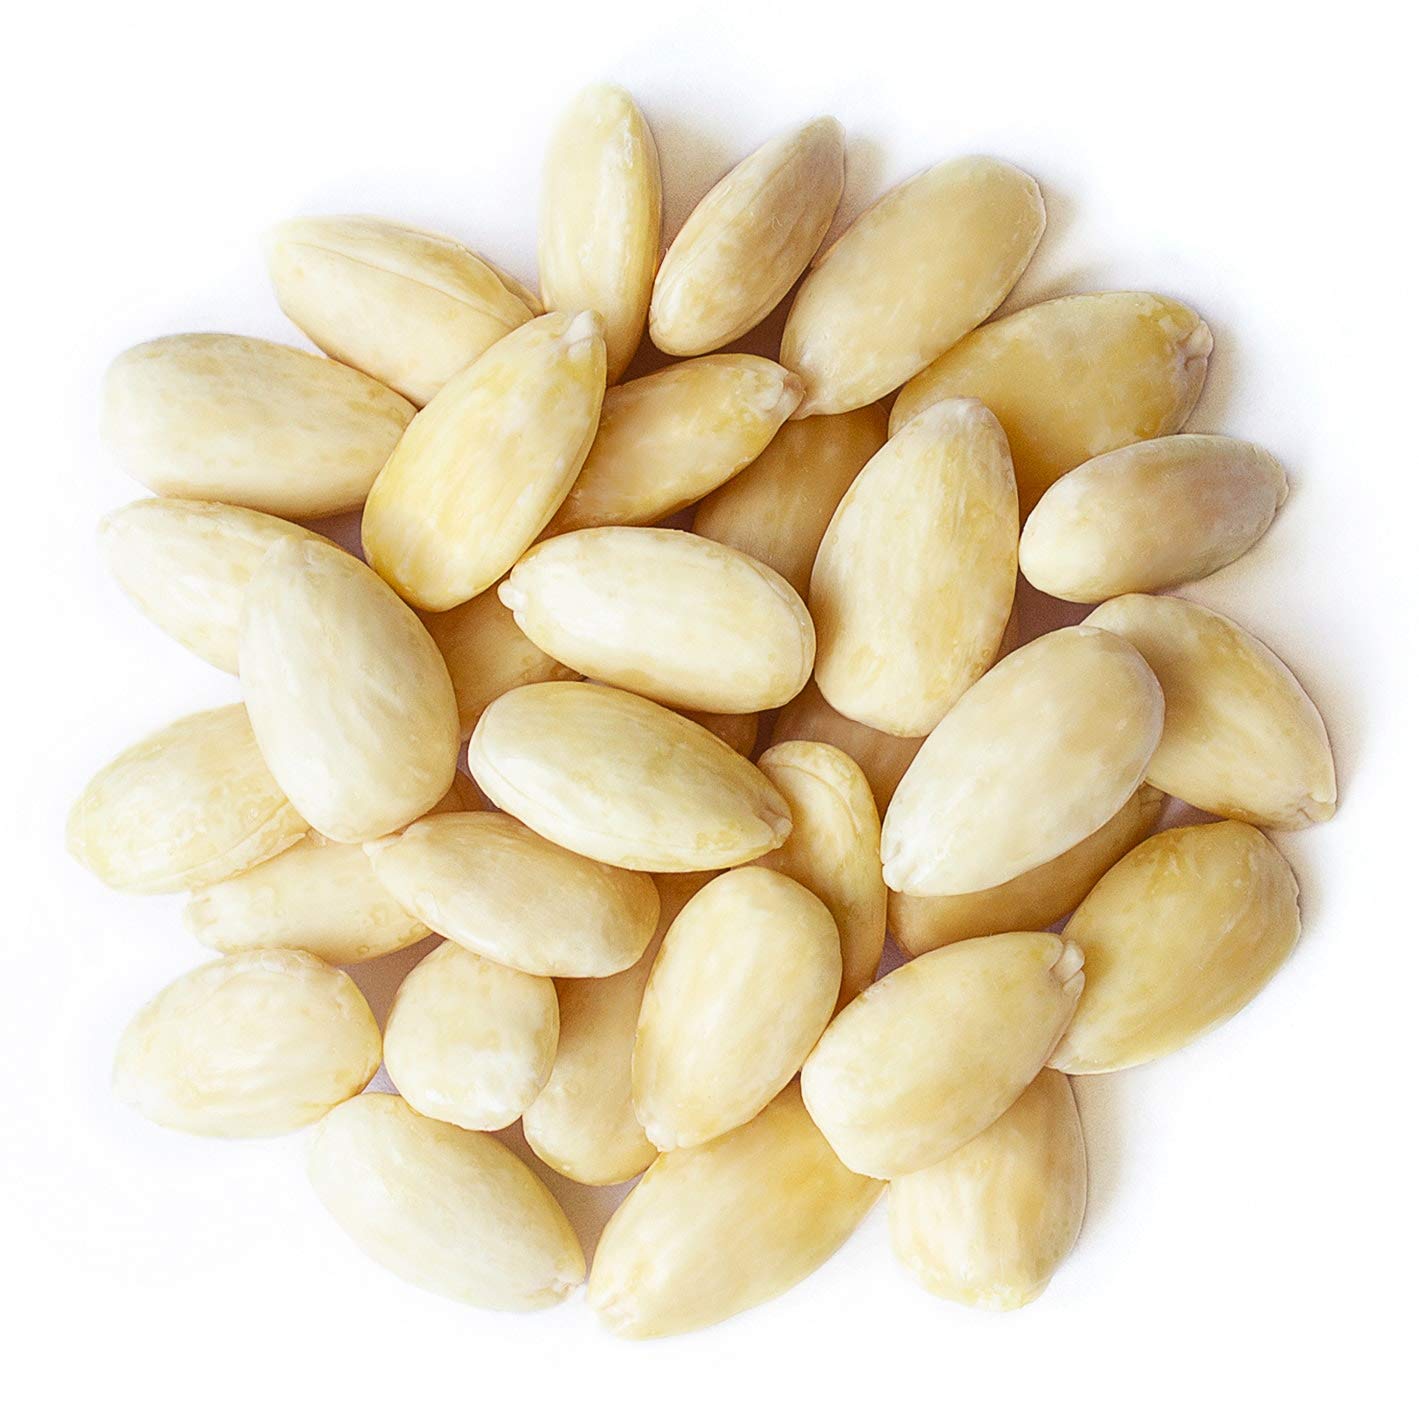 Blanched Almonds — Whole, Non-GMO Verified, Kosher, Raw, Vegan - by Food to Live